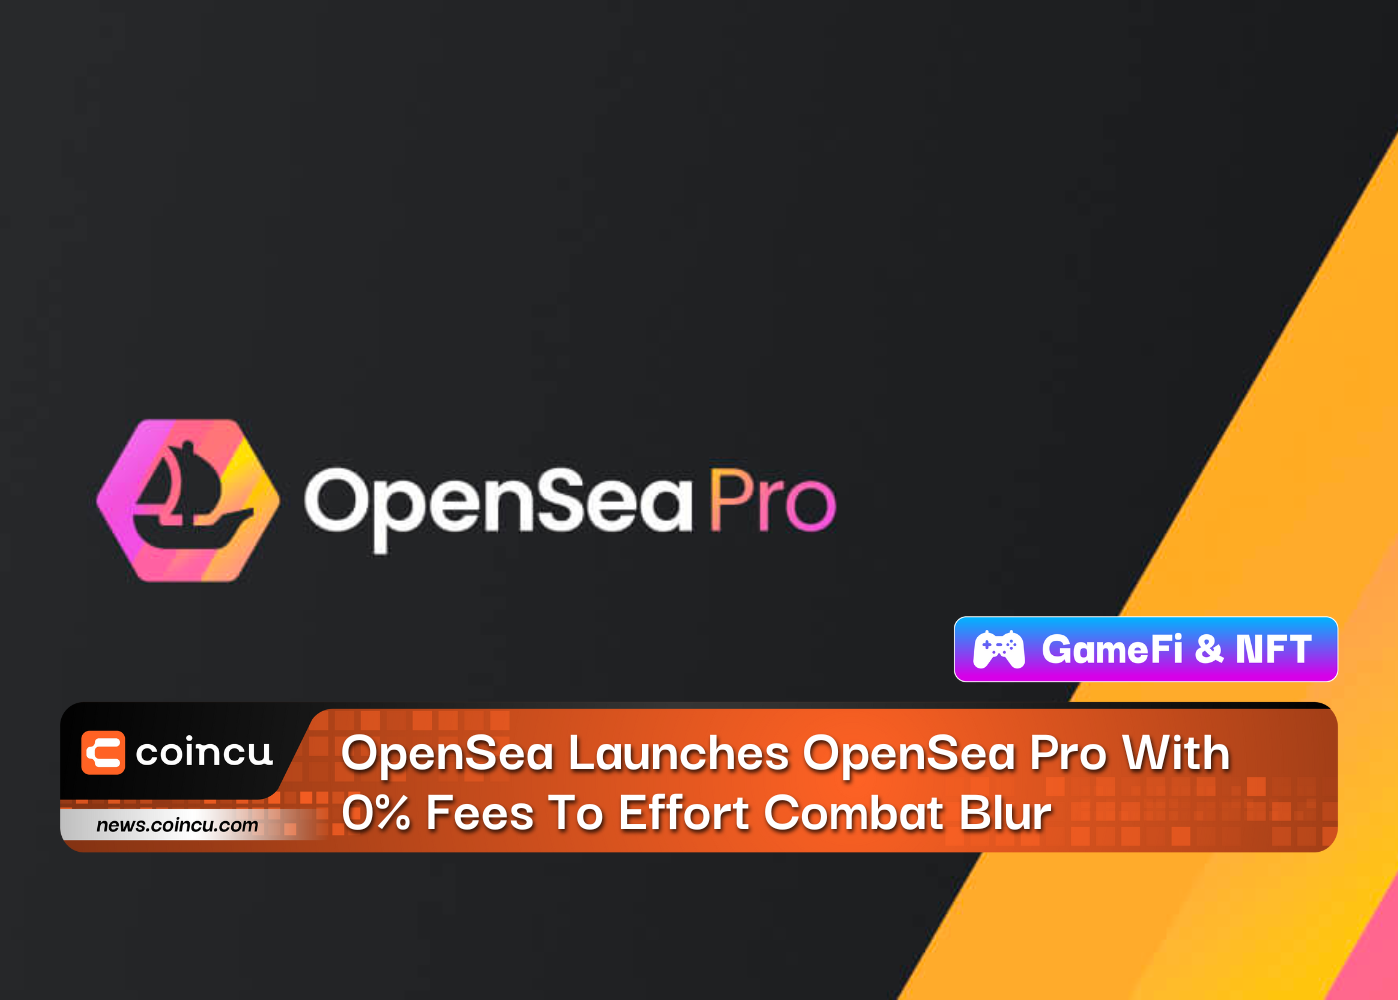 OpenSea Launches OpenSea Pro With 0% Fees To Effort Combat Blur